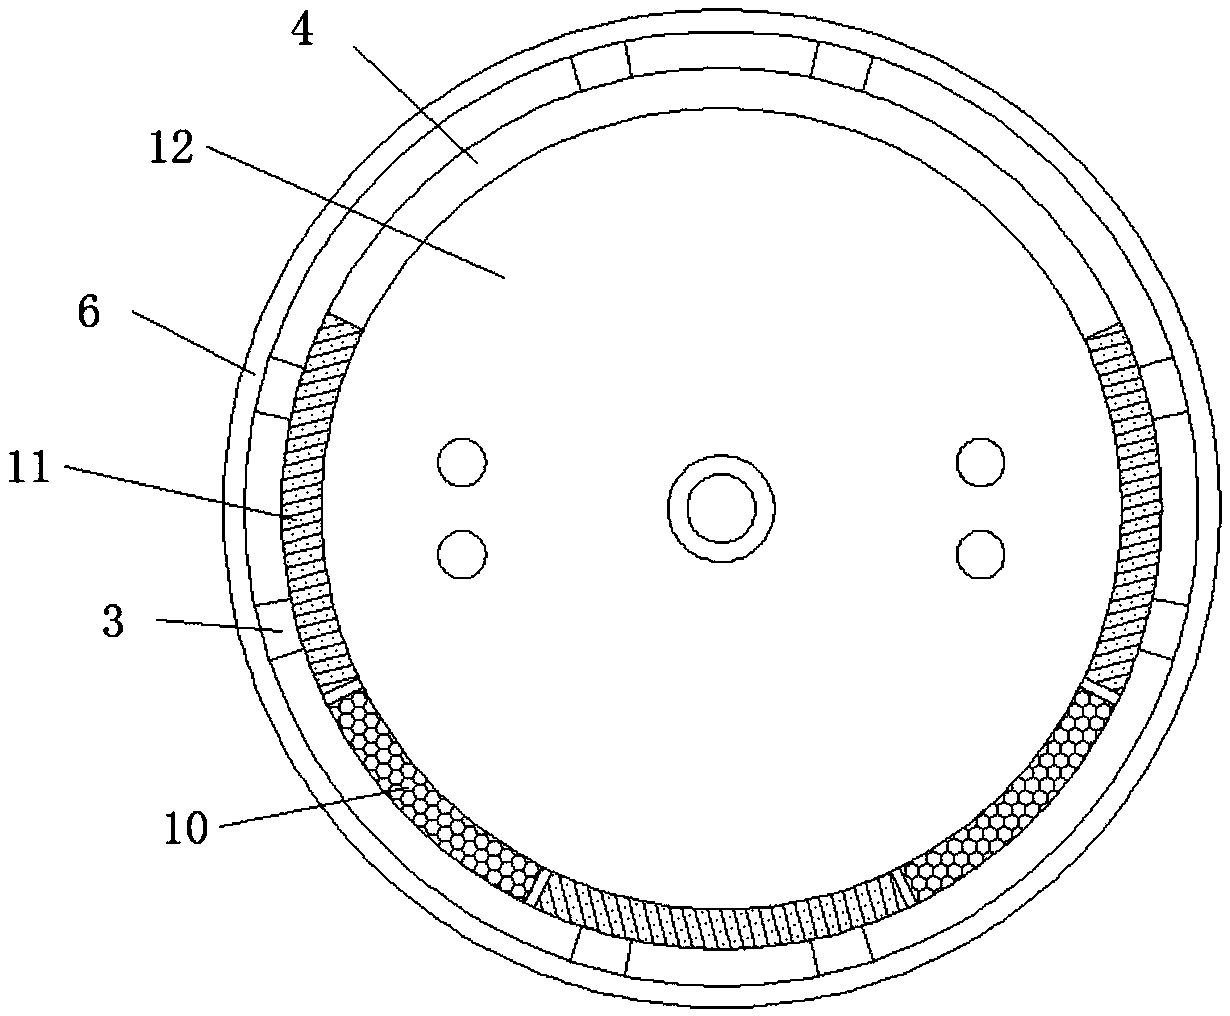 Circulating grinding and screening device for Chinese herbal medicines